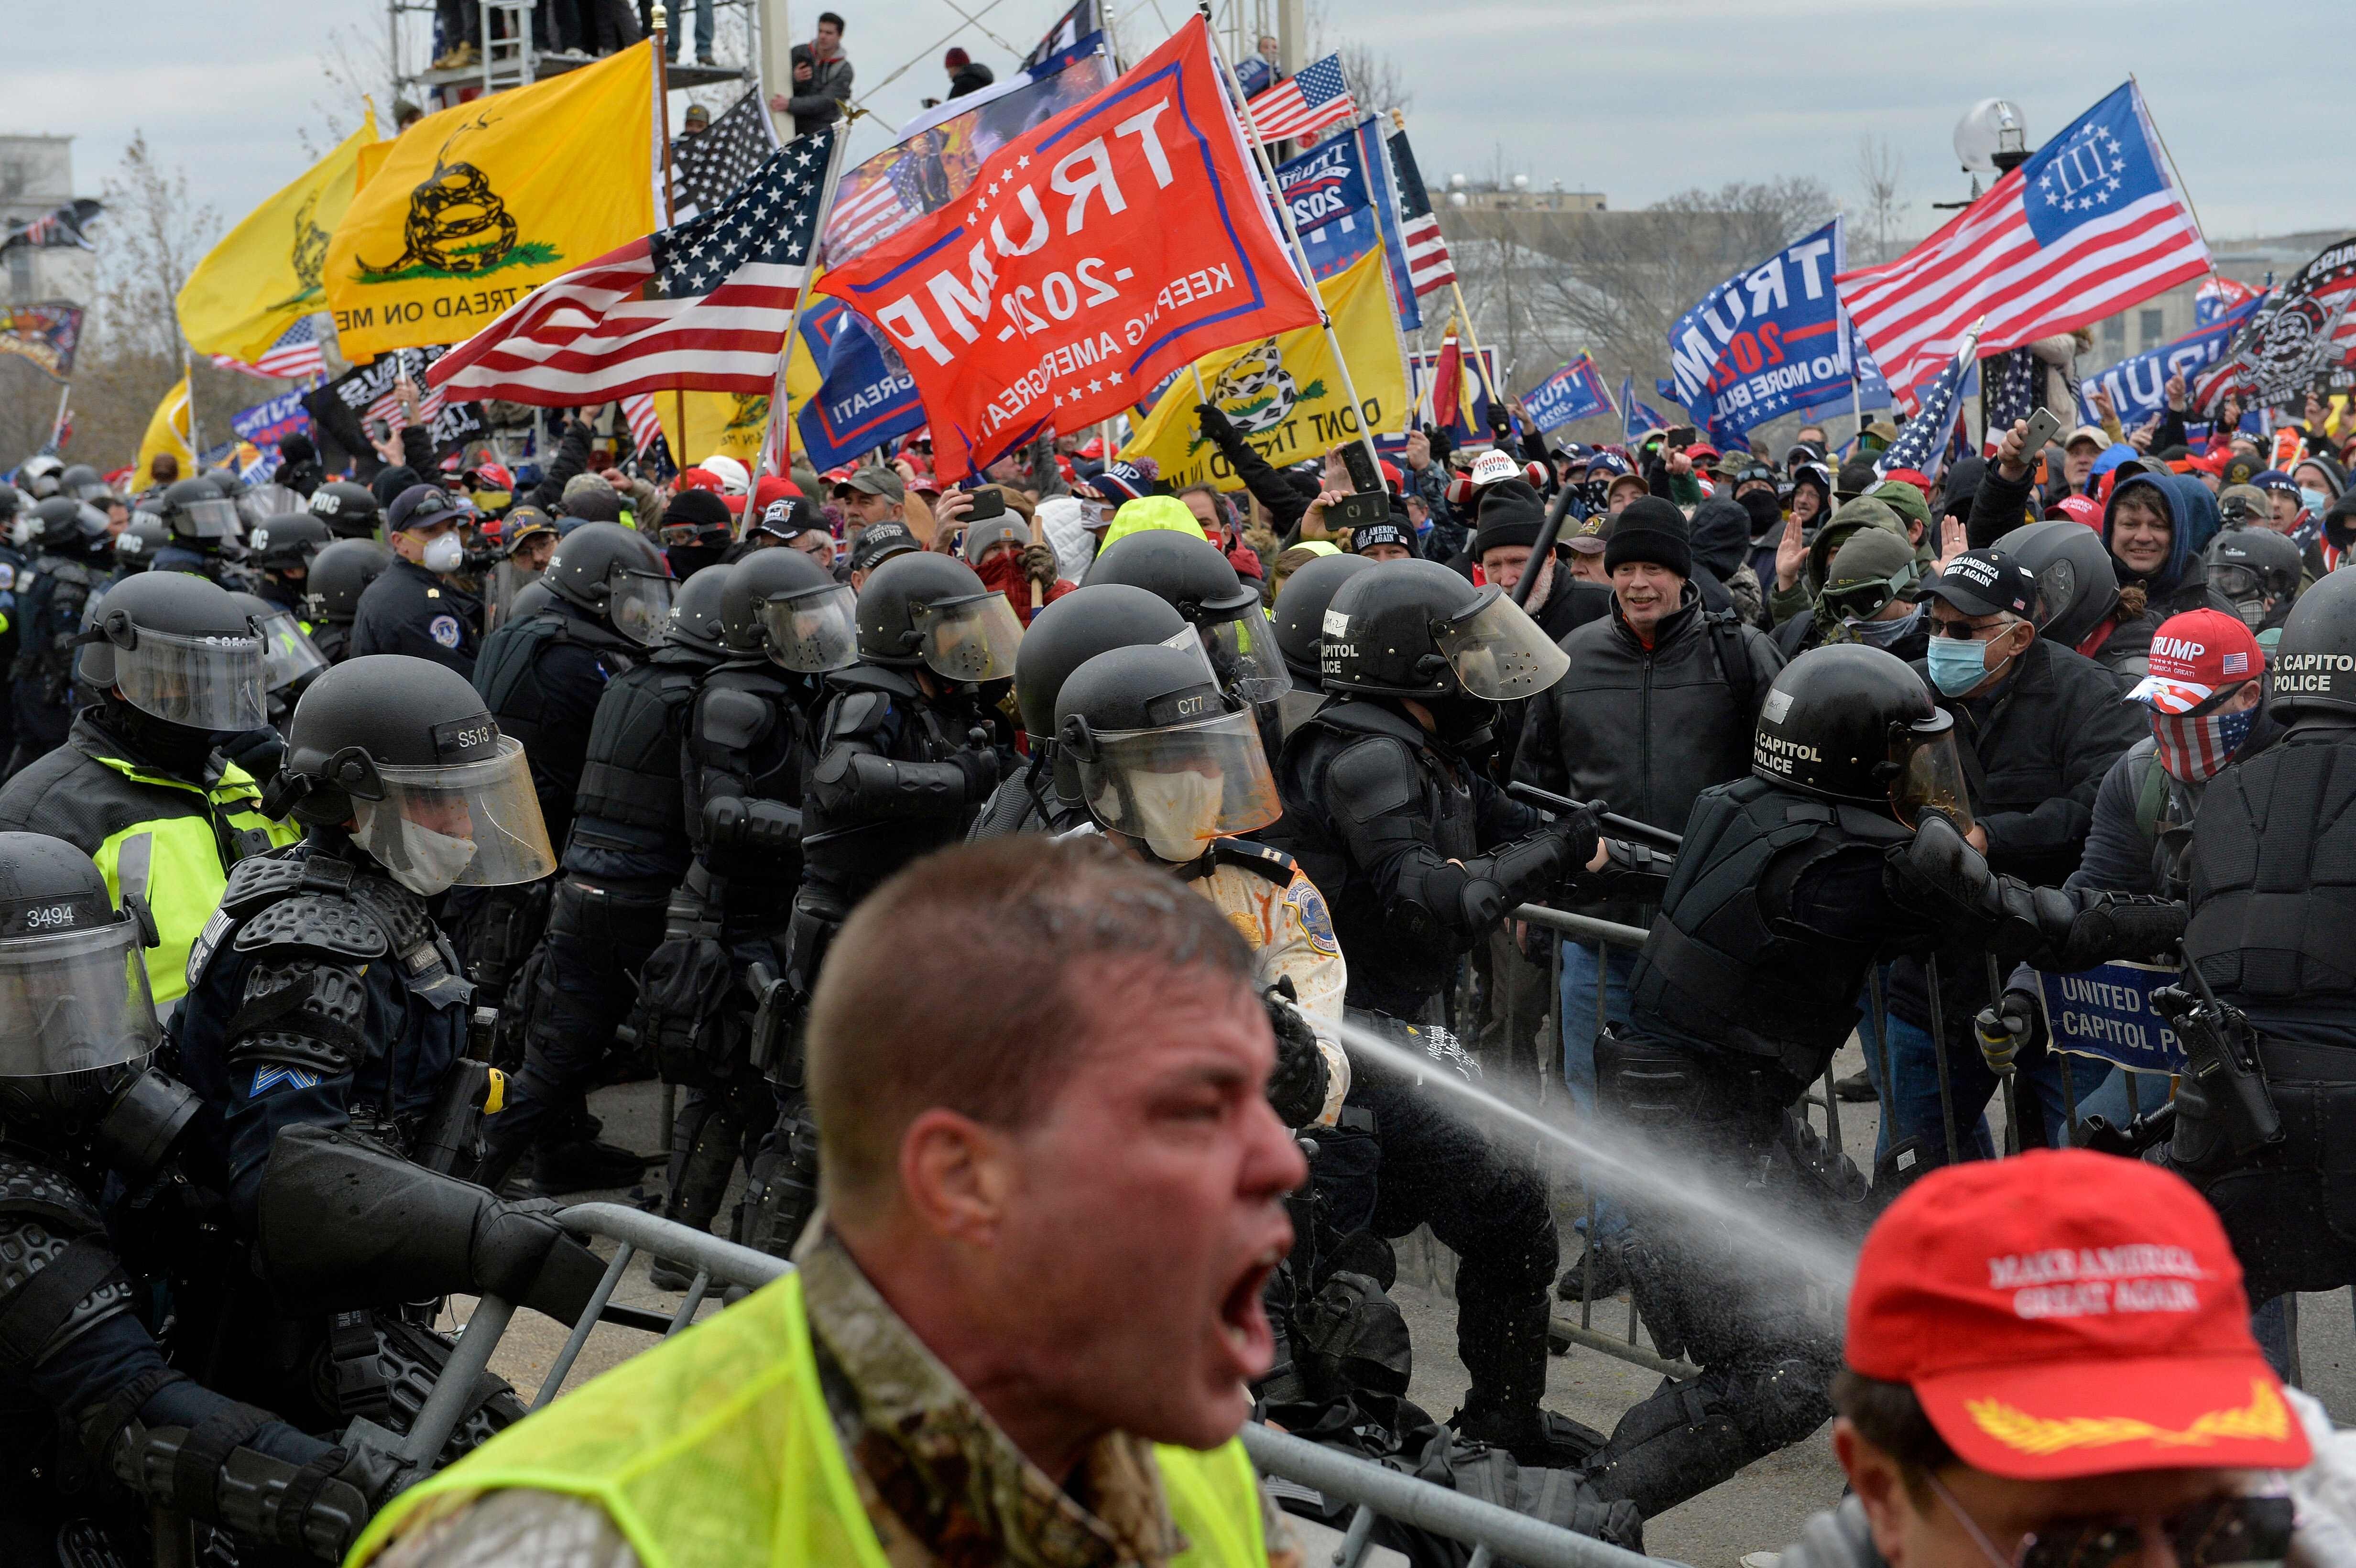 Trump supporters clash with police and security forces as people try to storm the US Capitol in Washington DC on January 6. Photo: AFP